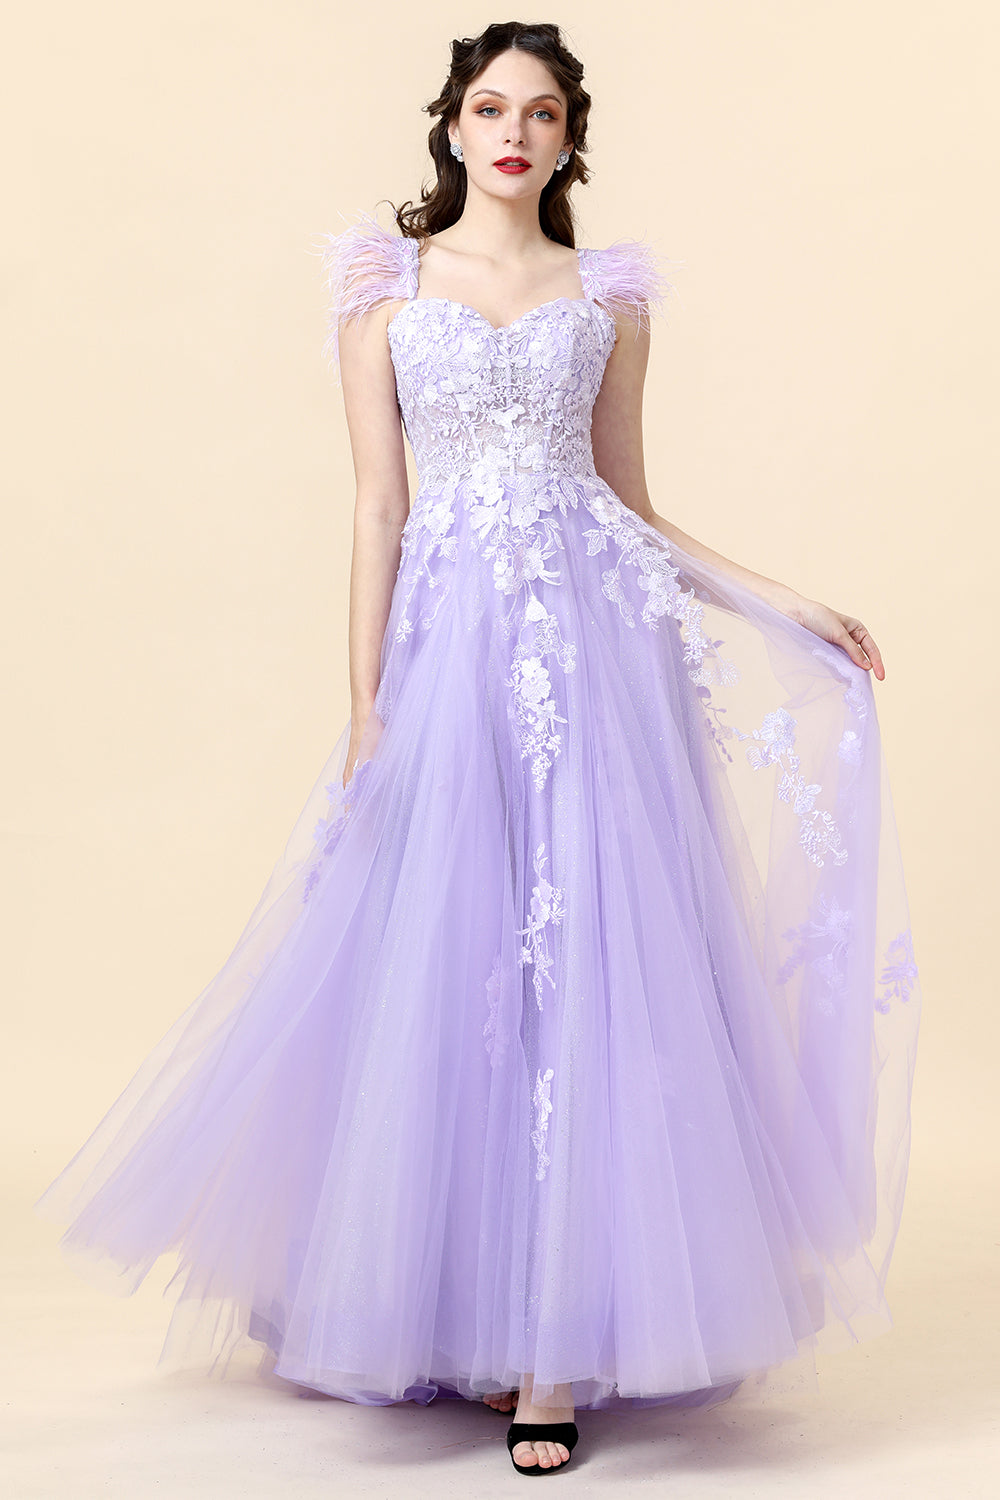 A Line Sweetheart Purple Long Formal Dress with Appliques